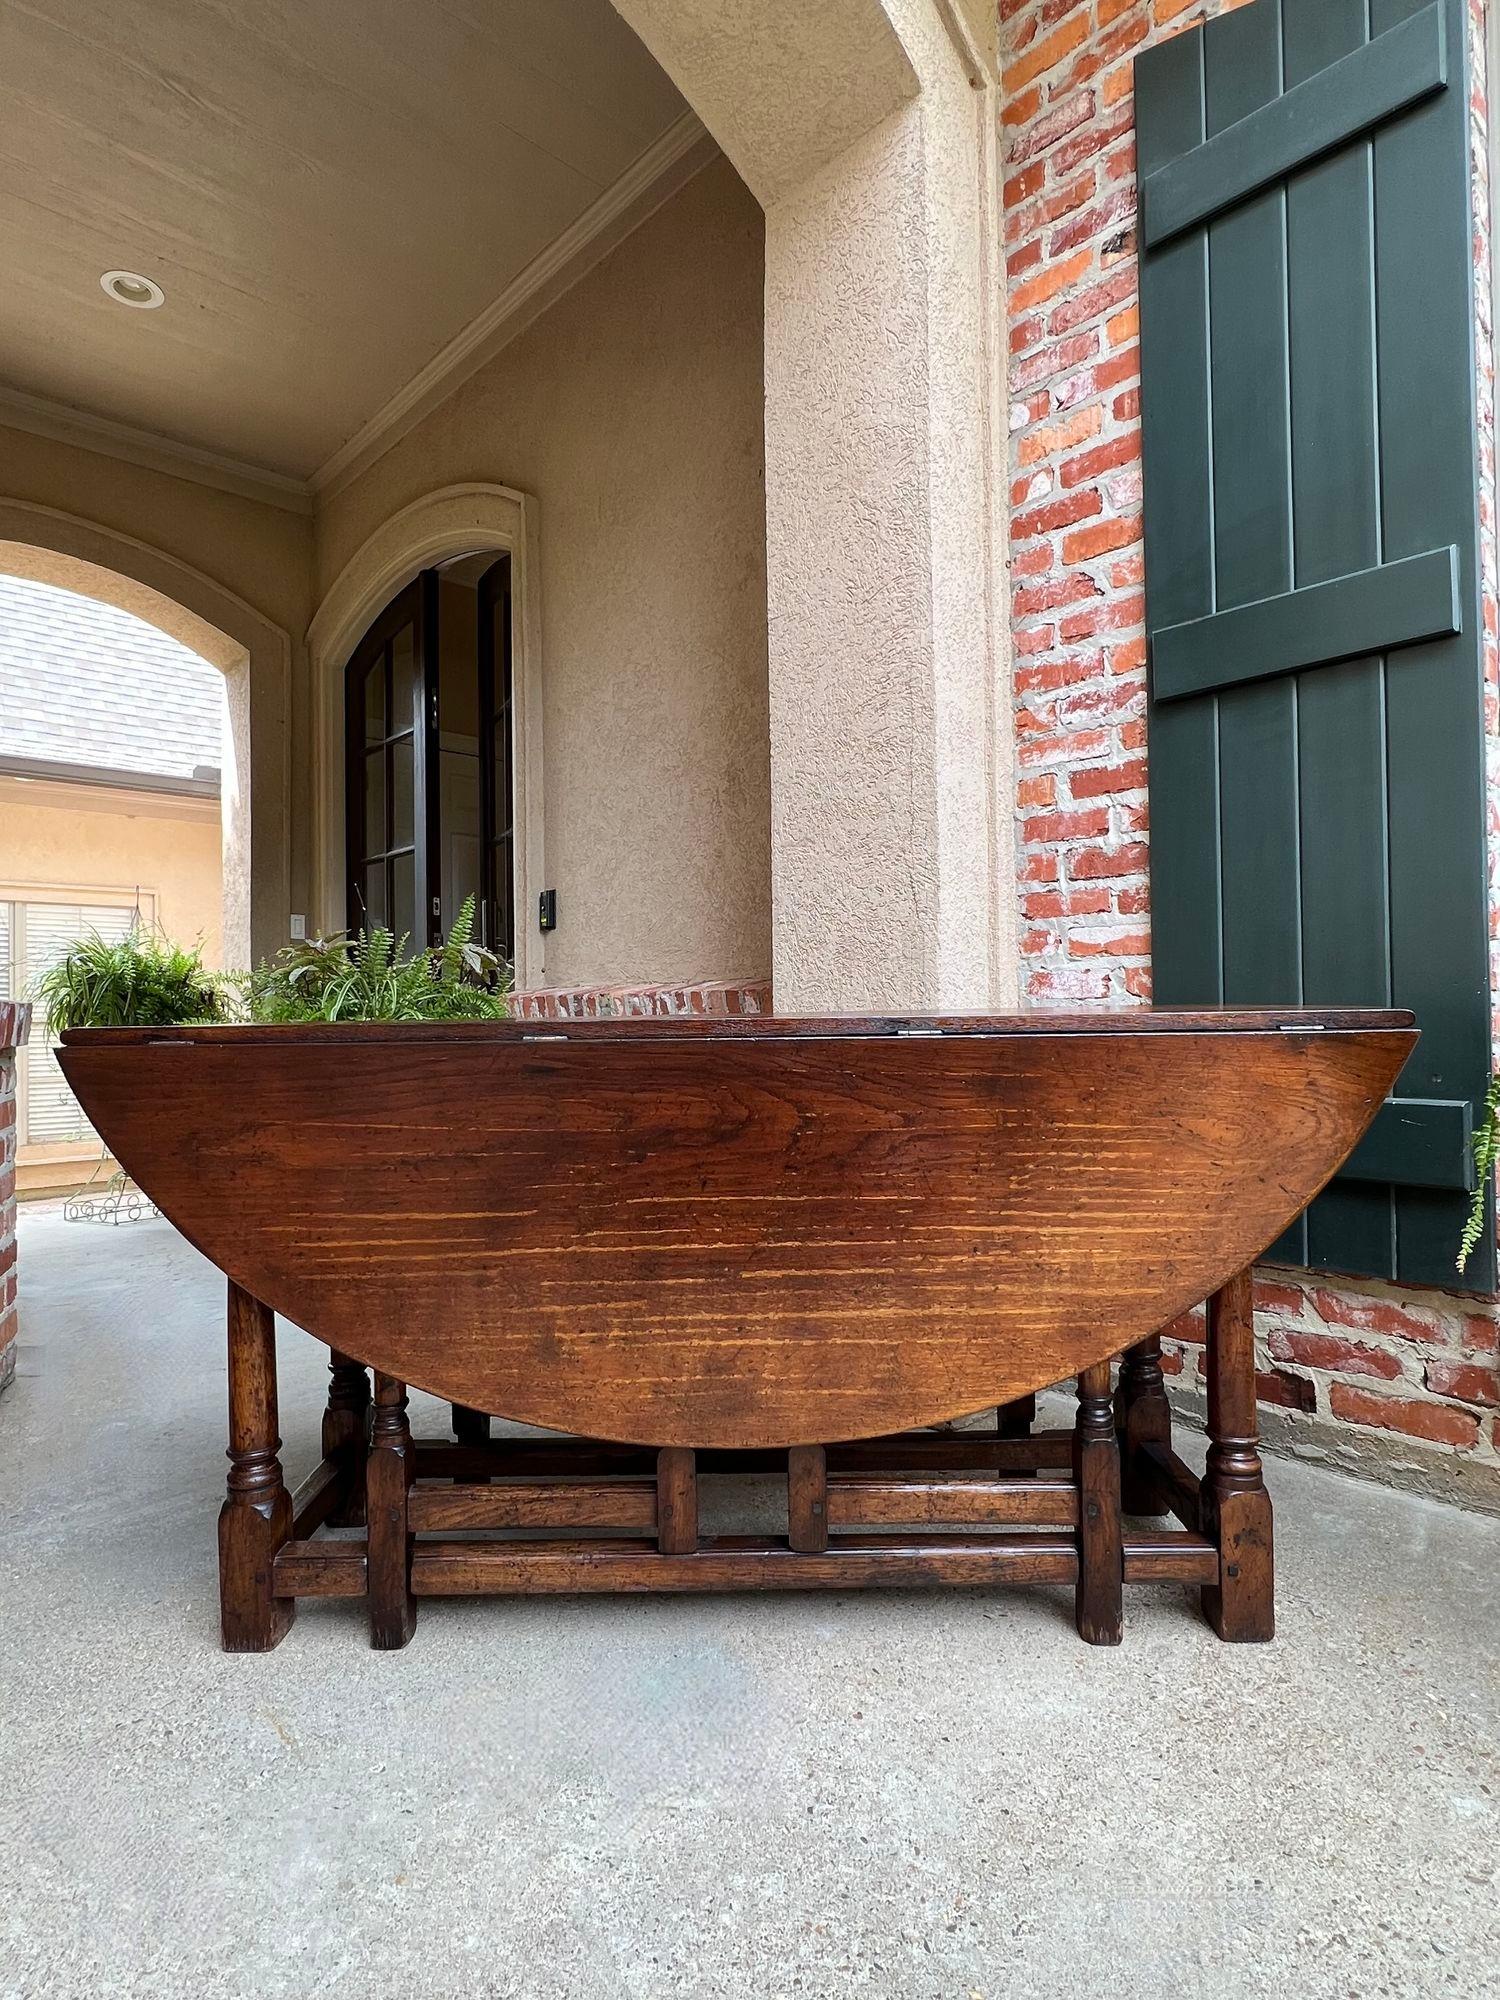 Antique French Hunt Wake Dining Table Oak Drop Leaf Gate Leg LARGE Sofa Table.

Direct from France, and one of our customer’s most sought-after table designs, a large, drop leaf, gate leg “wake” or “hunt” table.
The design of these tables makes them